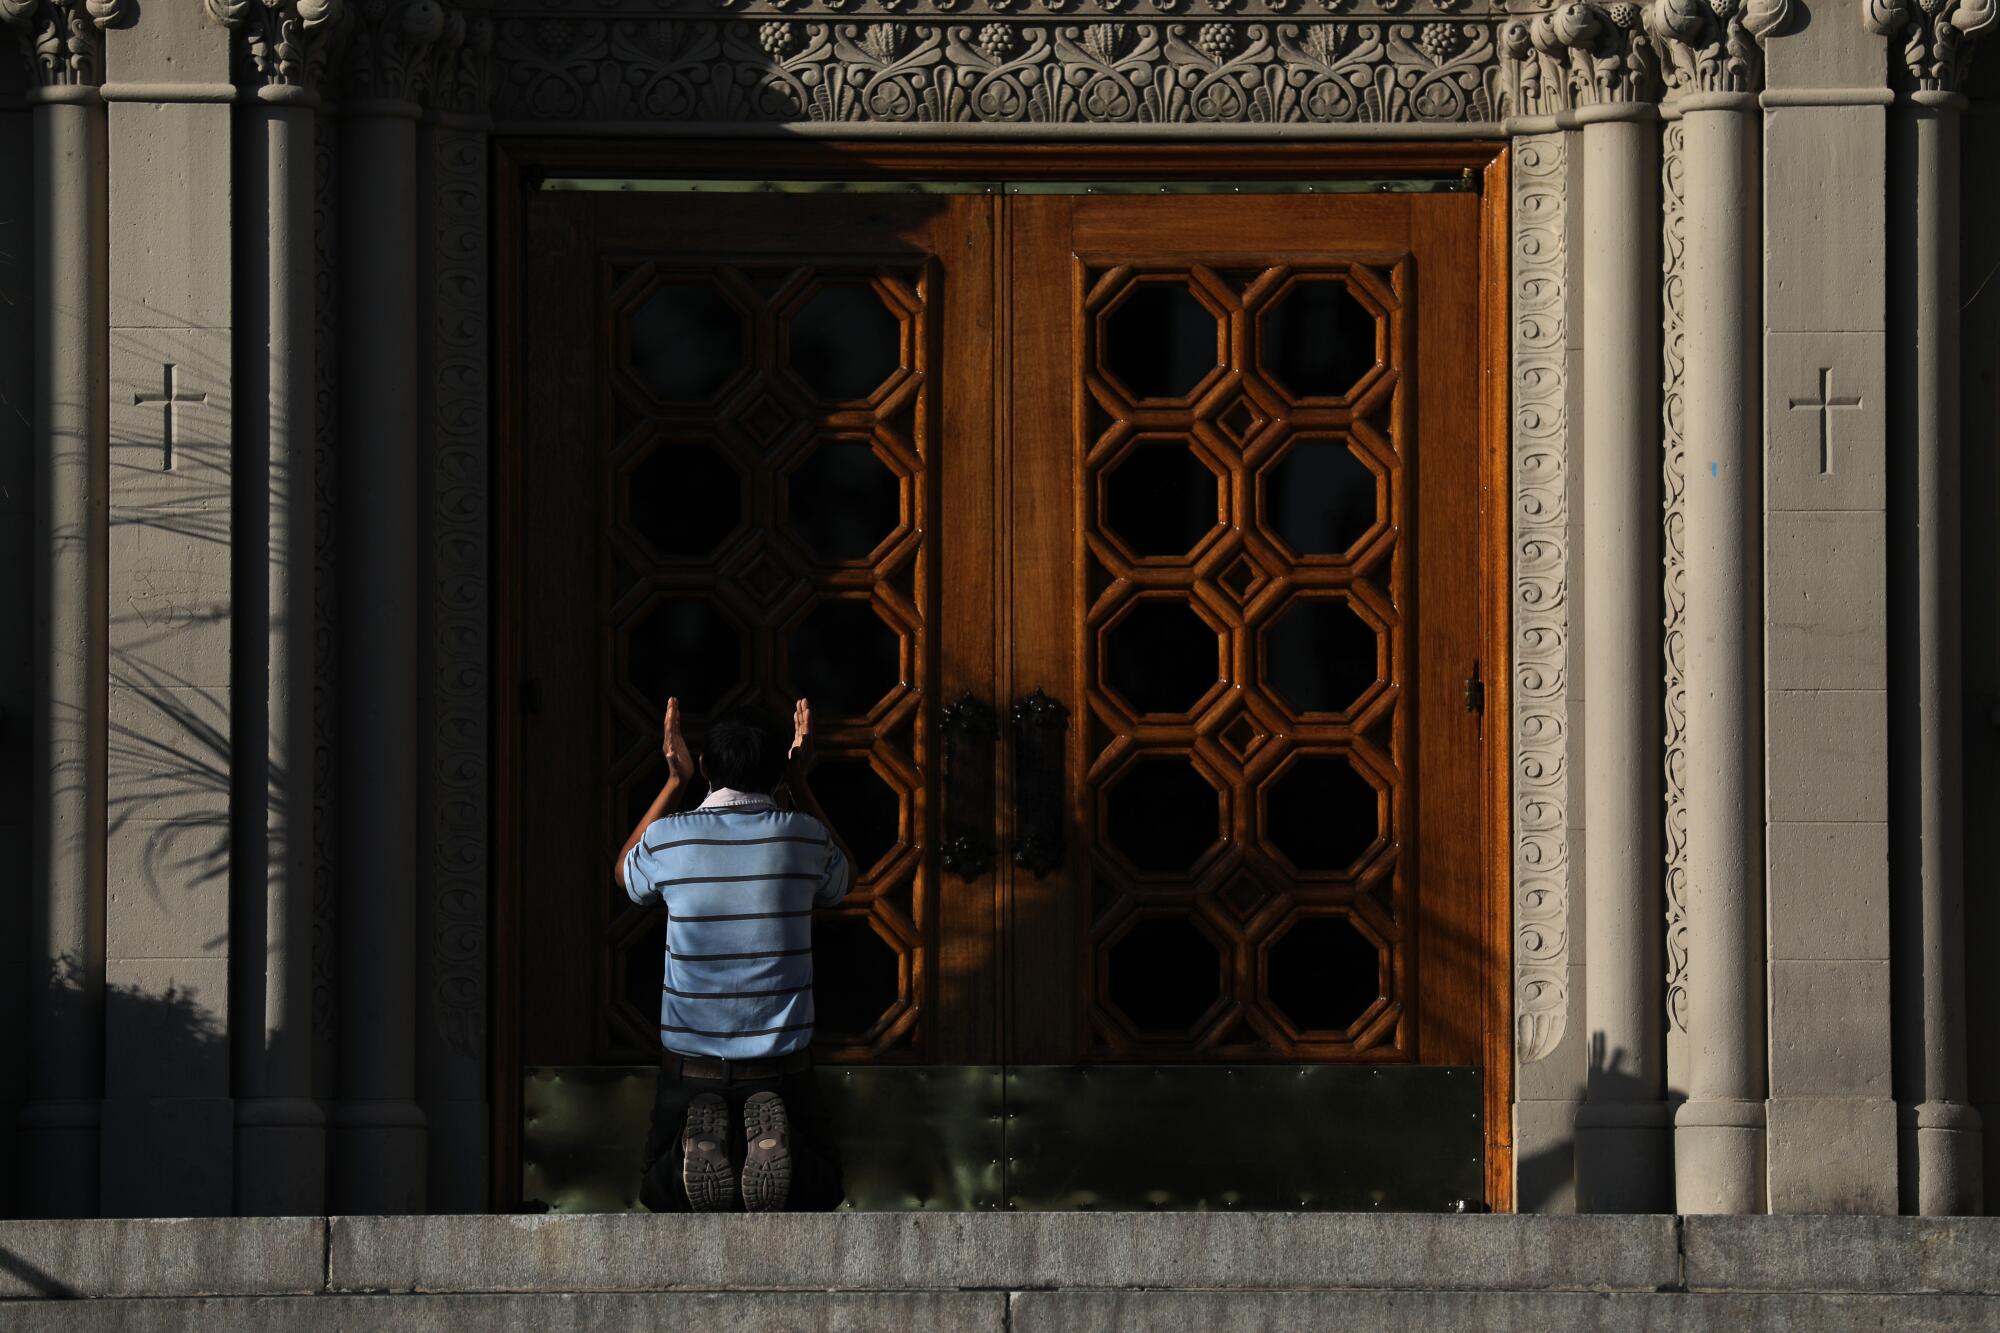 Man prays in front of the closed doors of the Immaculate Conception Catholic Church in downtown Los Angeles